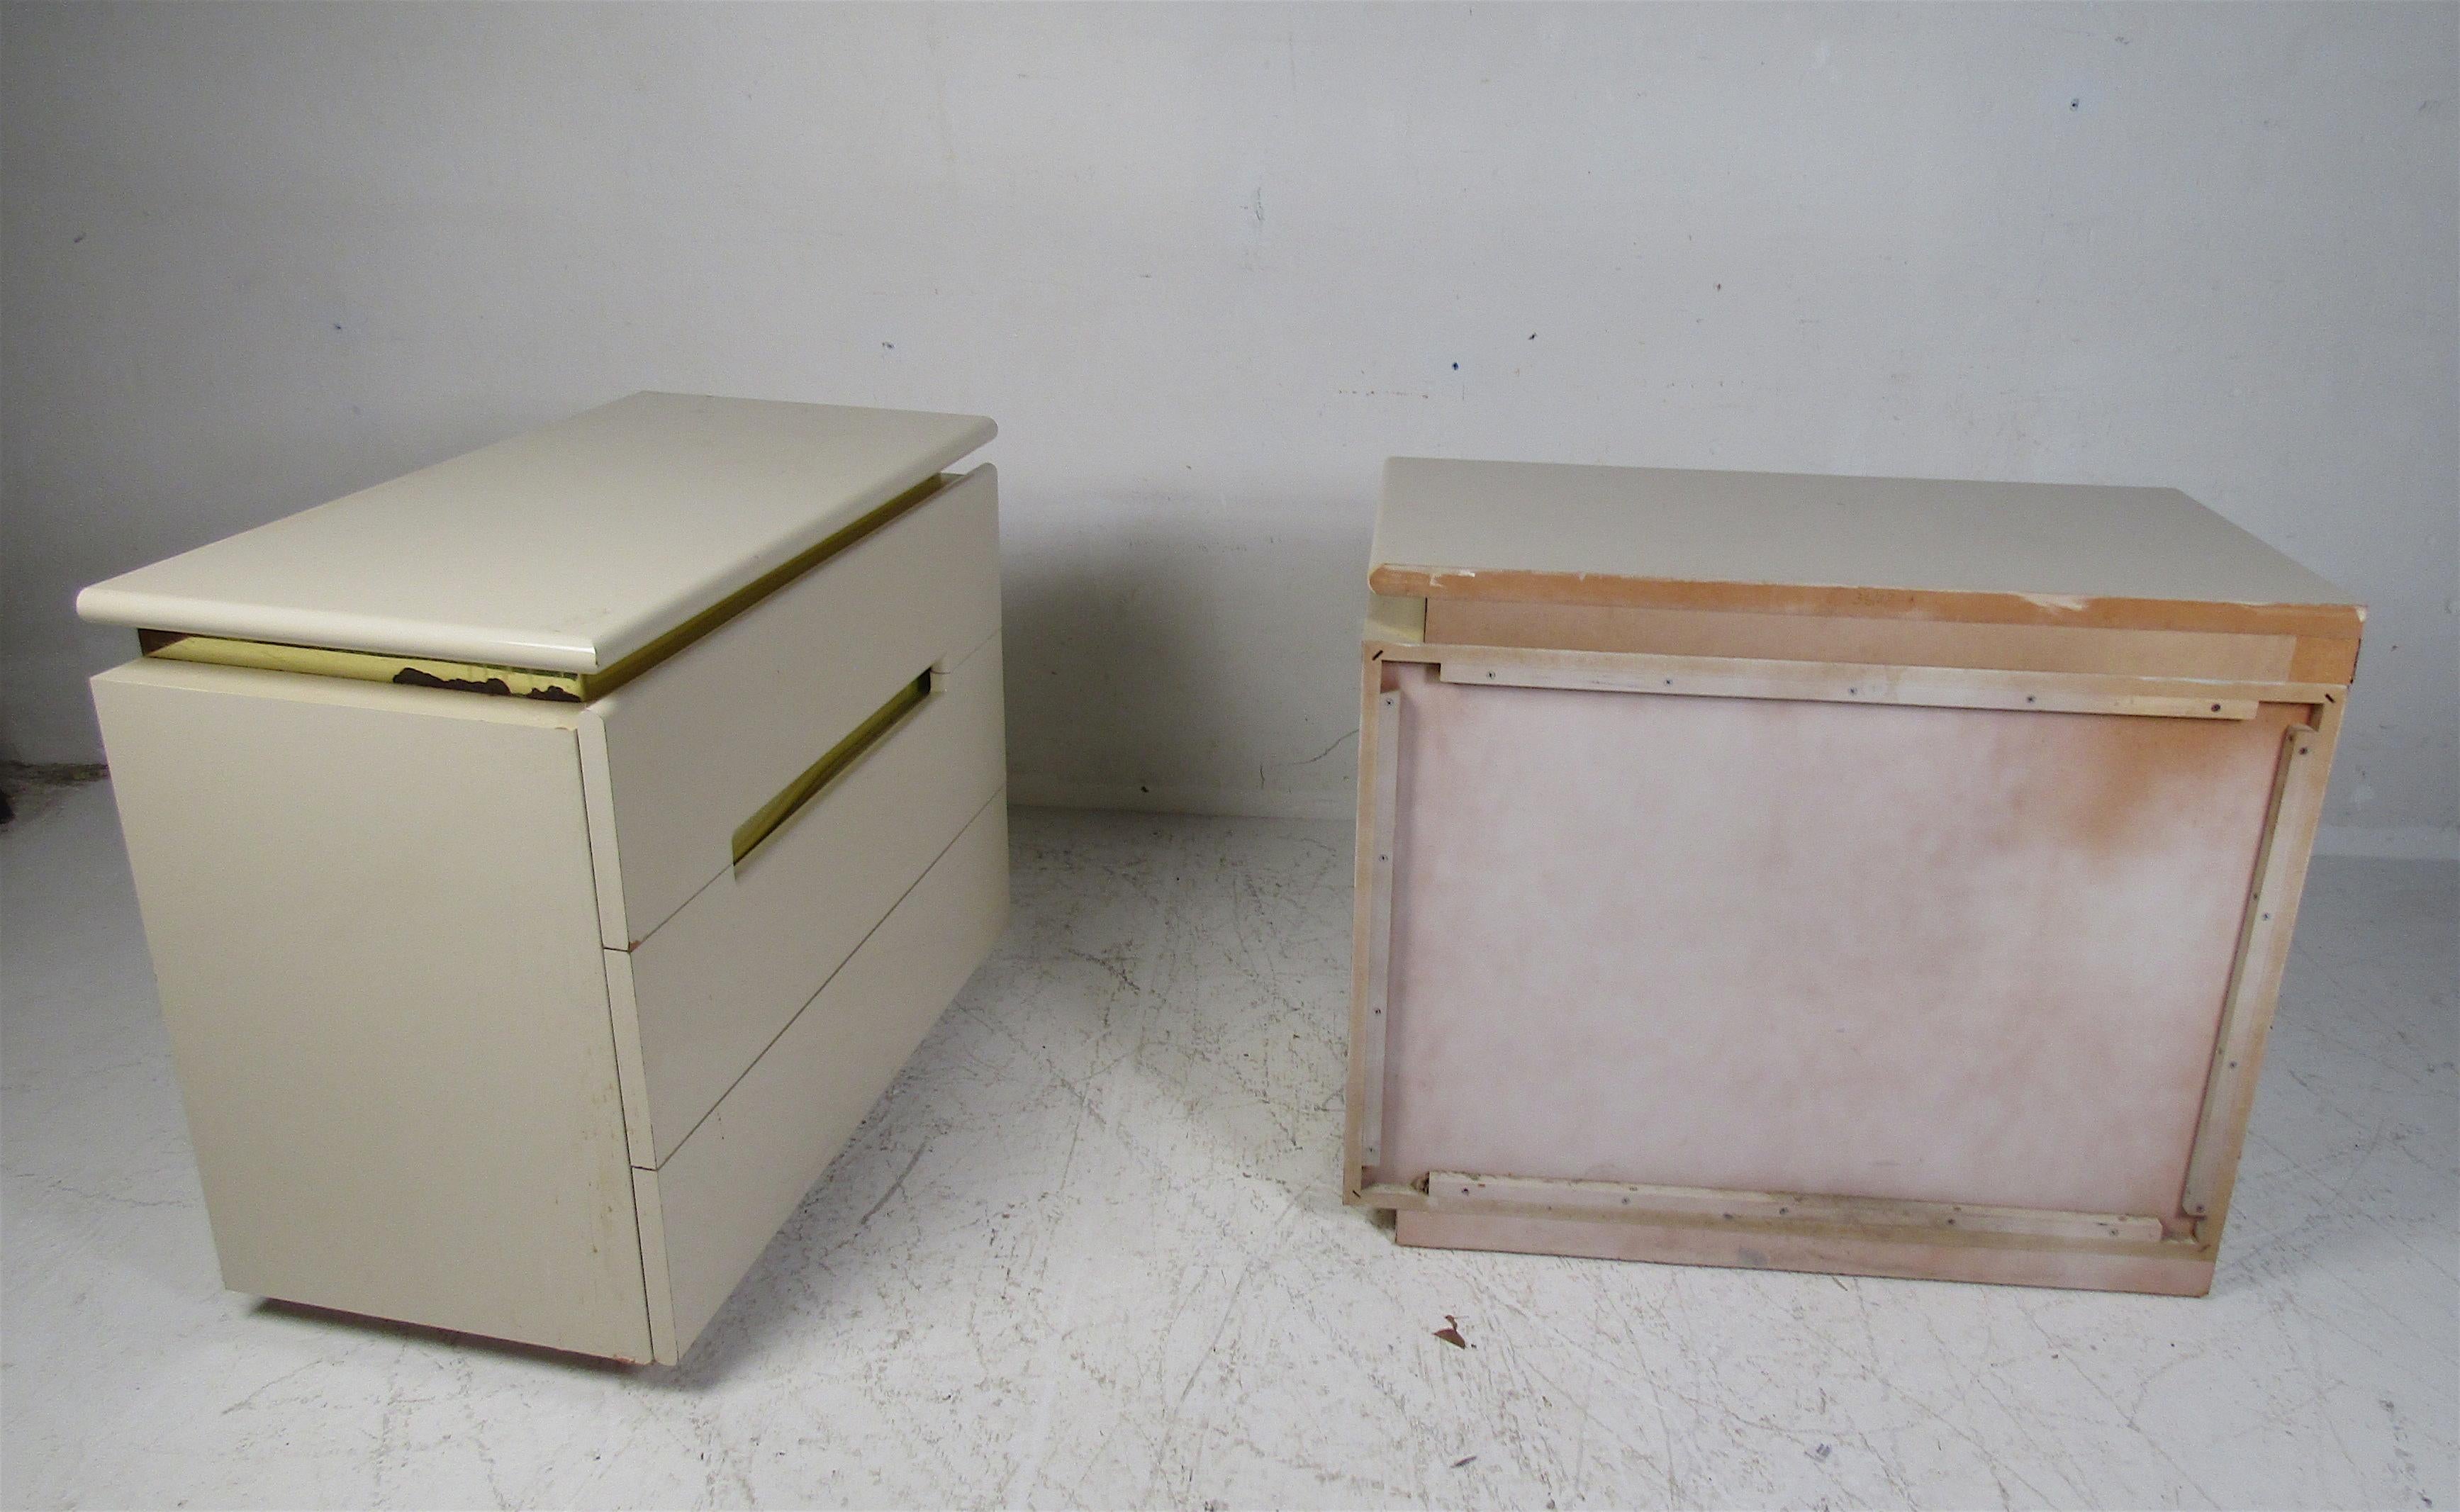 A beautiful pair of vintage modern chests with brass trim and raised tops. This stylish pair offers ample storage space within its three hefty drawers. The beautiful off-white color with a lacquered finish adds to the midcentury appeal. Please